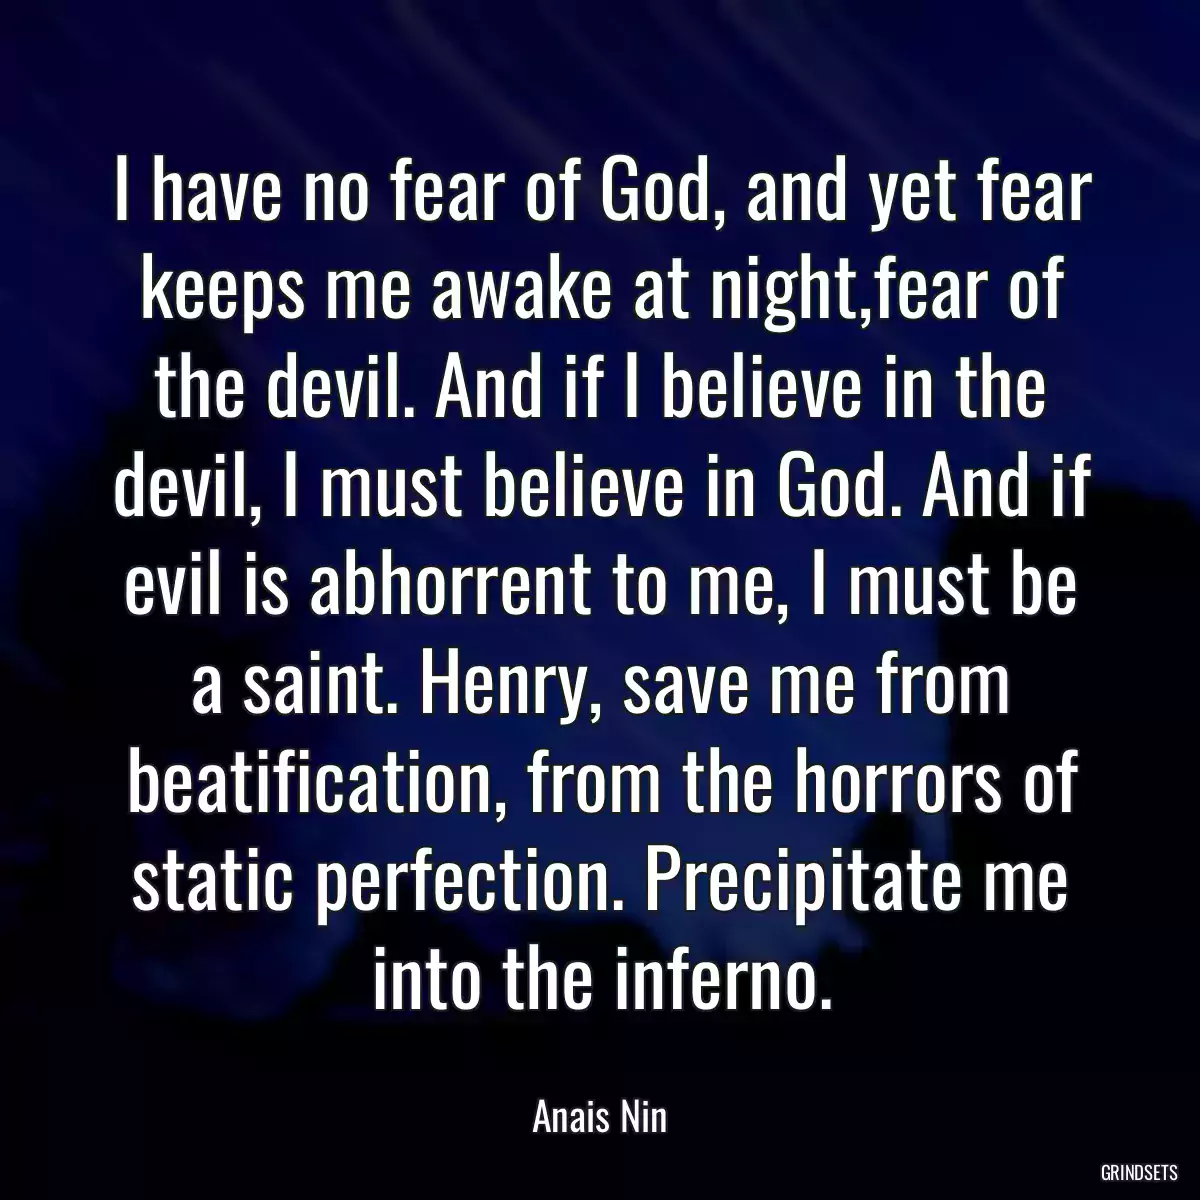 I have no fear of God, and yet fear keeps me awake at night,fear of the devil. And if I believe in the devil, I must believe in God. And if evil is abhorrent to me, I must be a saint. Henry, save me from beatification, from the horrors of static perfection. Precipitate me into the inferno.